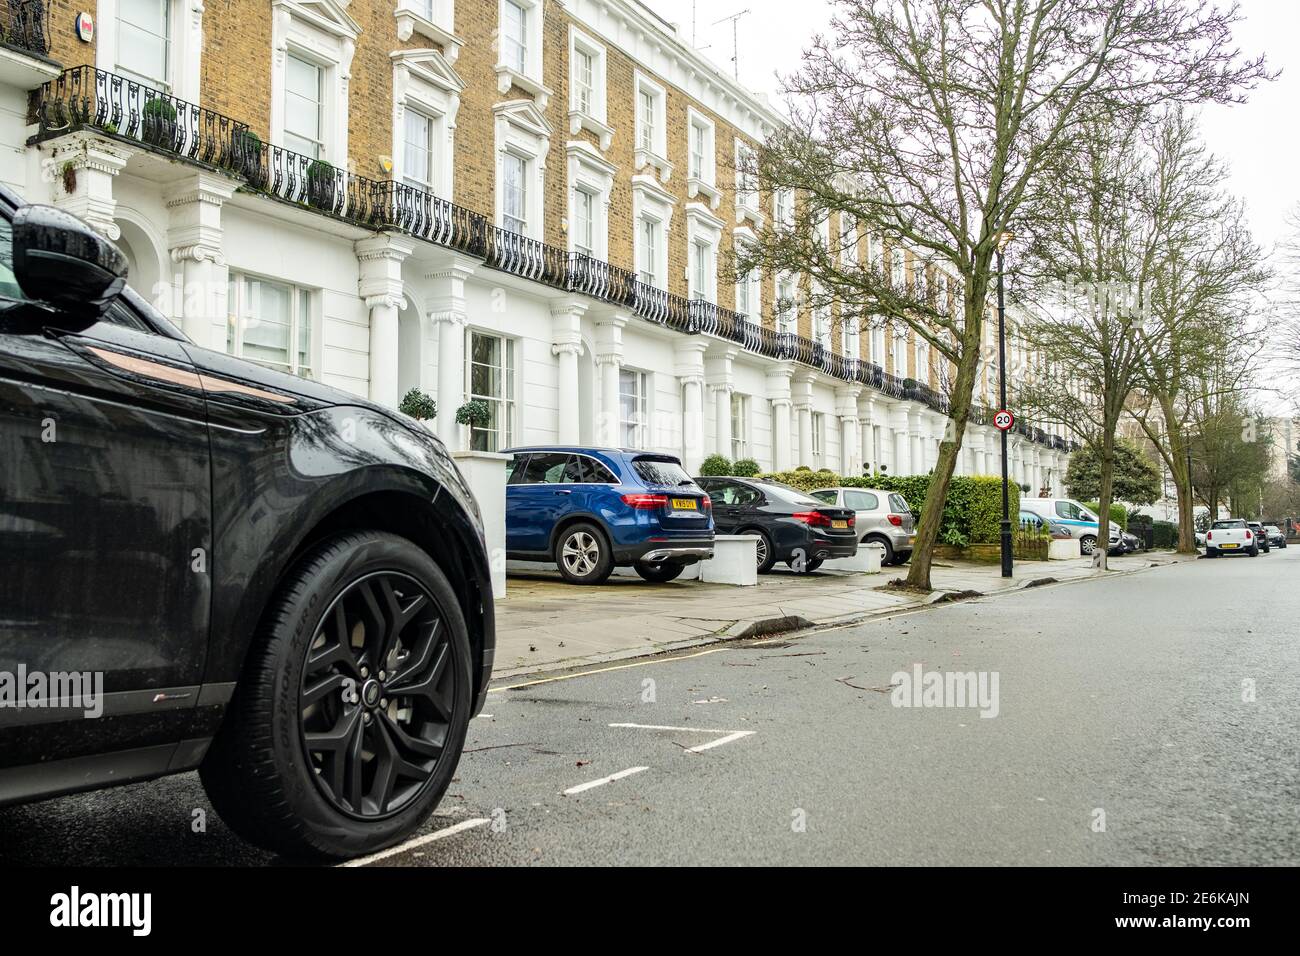 London- An attractive street of terraced houses off Abbey Road in north west London Stock Photo